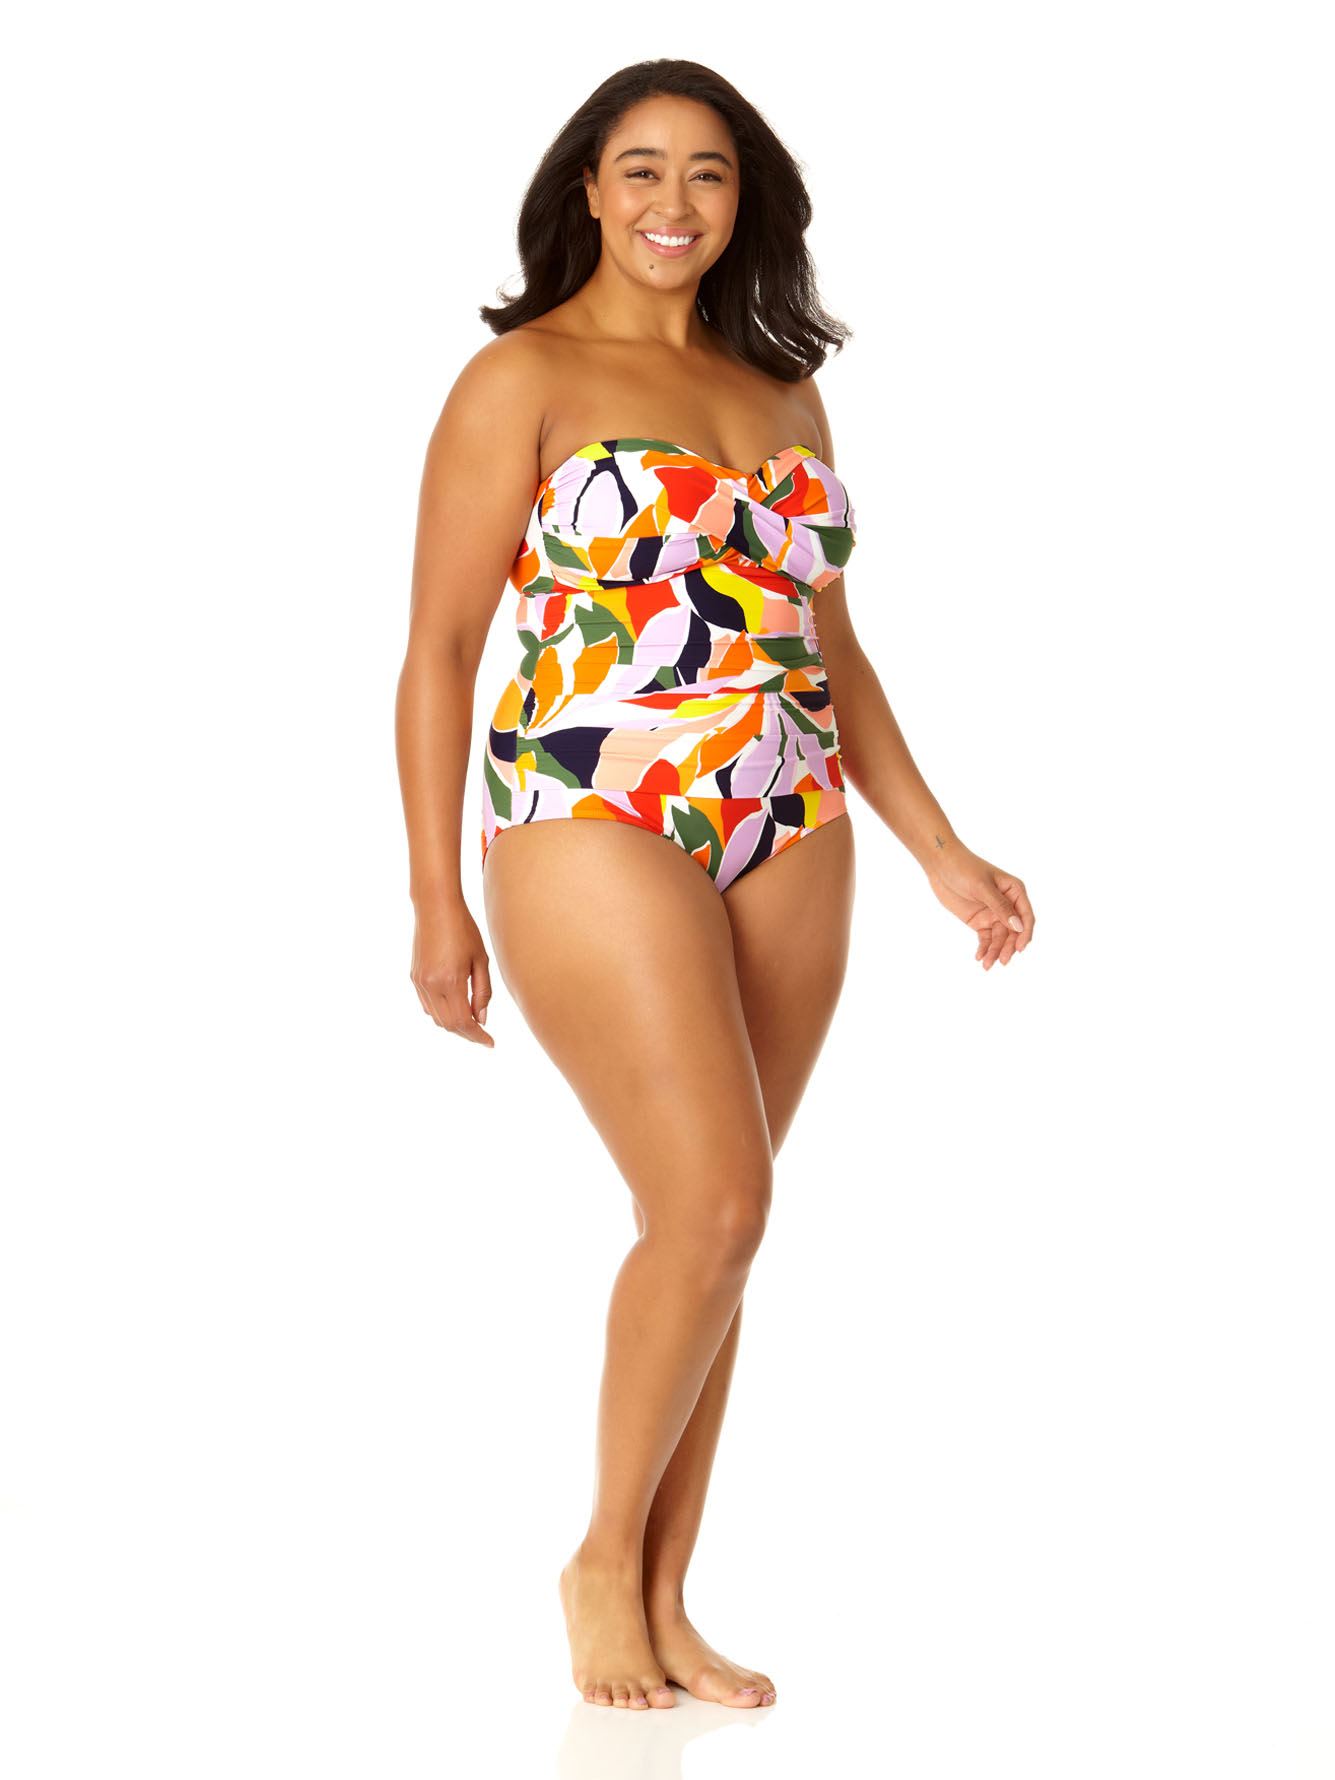 Swimsuits For All Women's Plus Size Ruched Twist Front One Piece Swimsuit  16 Black 